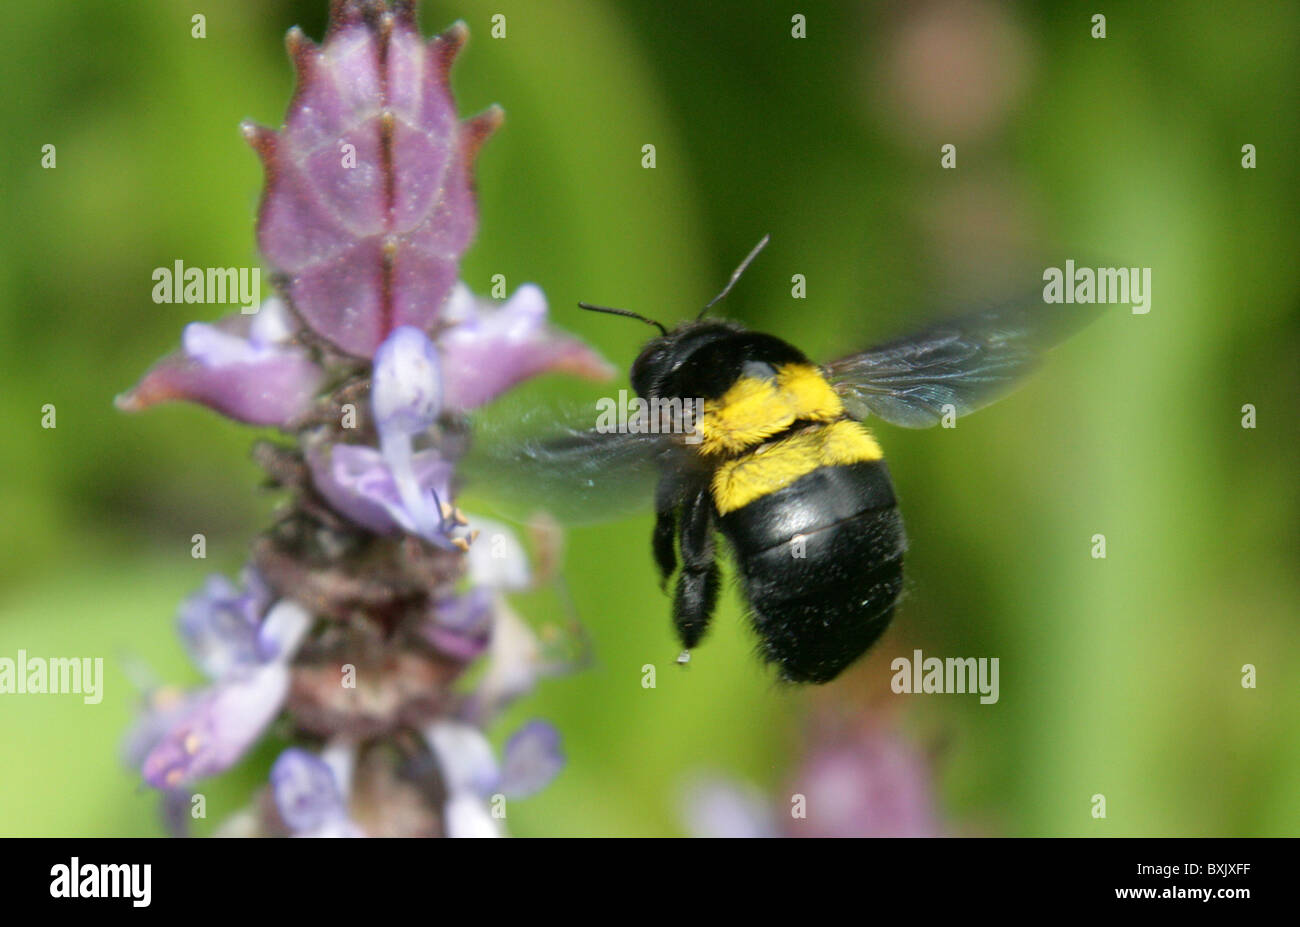 Female Carpenter Bee, Xylocopa caffra, [ Xylocopa caffra mossambica ], Xylocopinae, Apidae. Cape Town, South Africa. Stock Photo